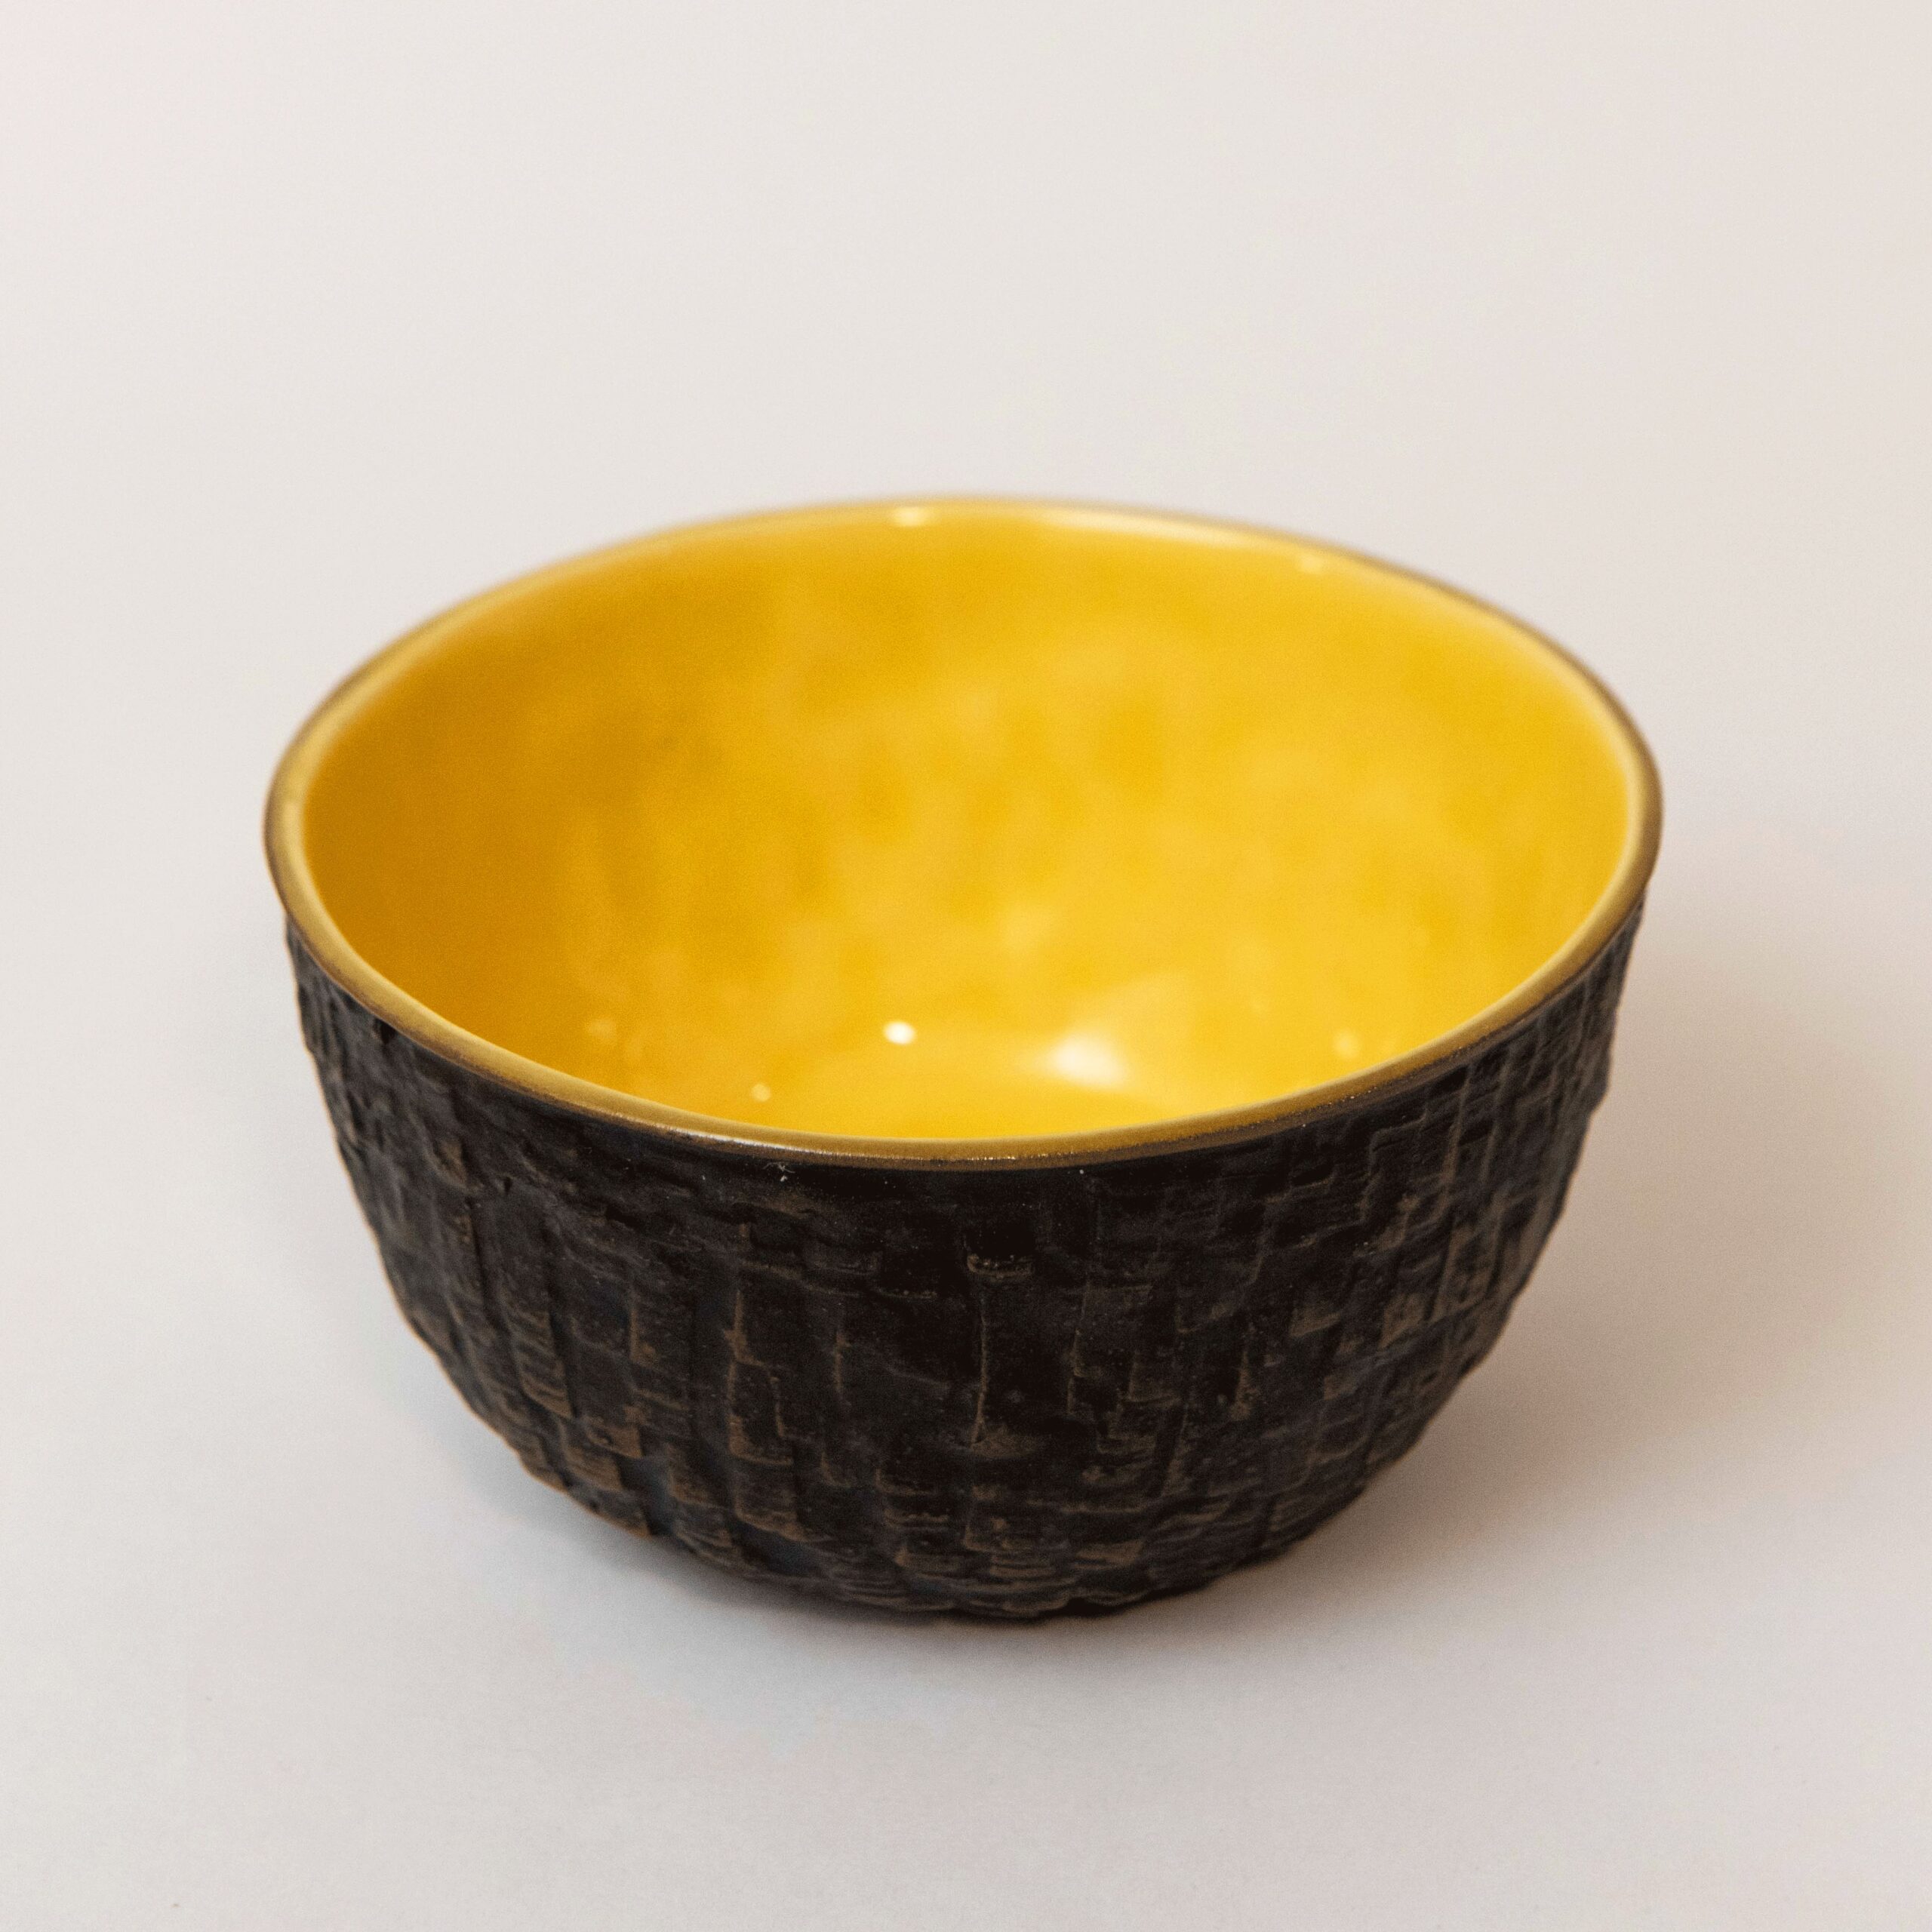 Studio Saboo: Rock Bowl in Yellow Product Image 1 of 1